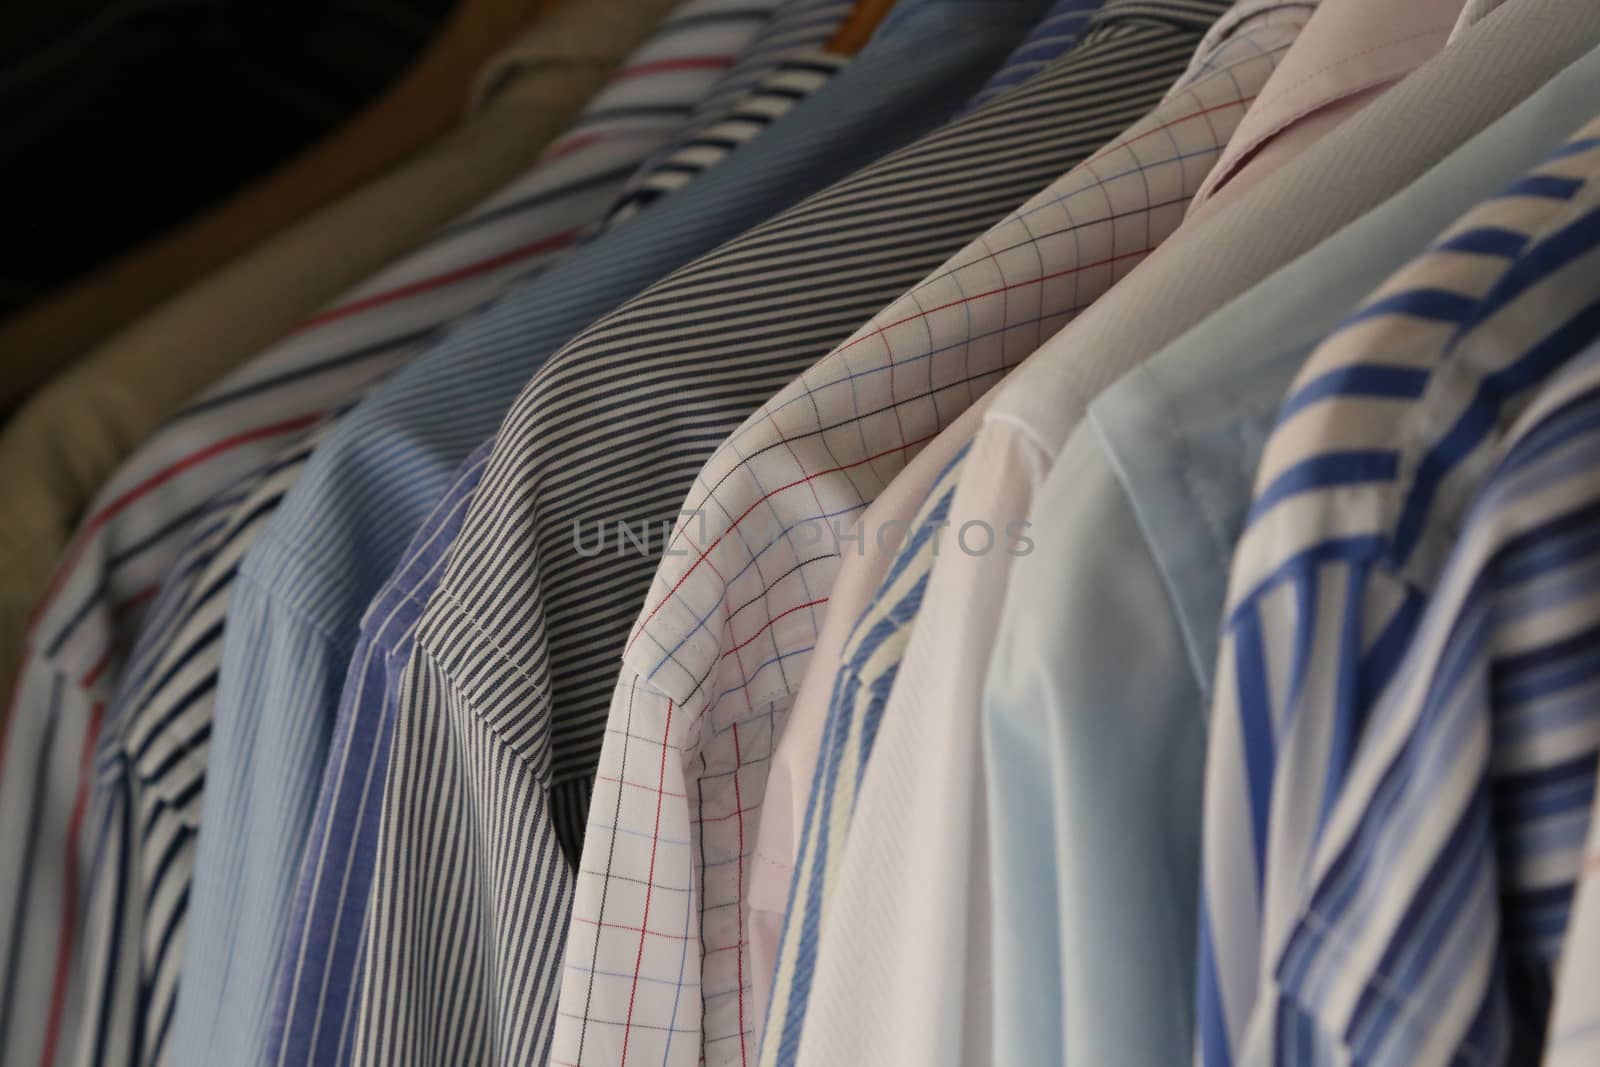 A row of hanging businessman's shirts